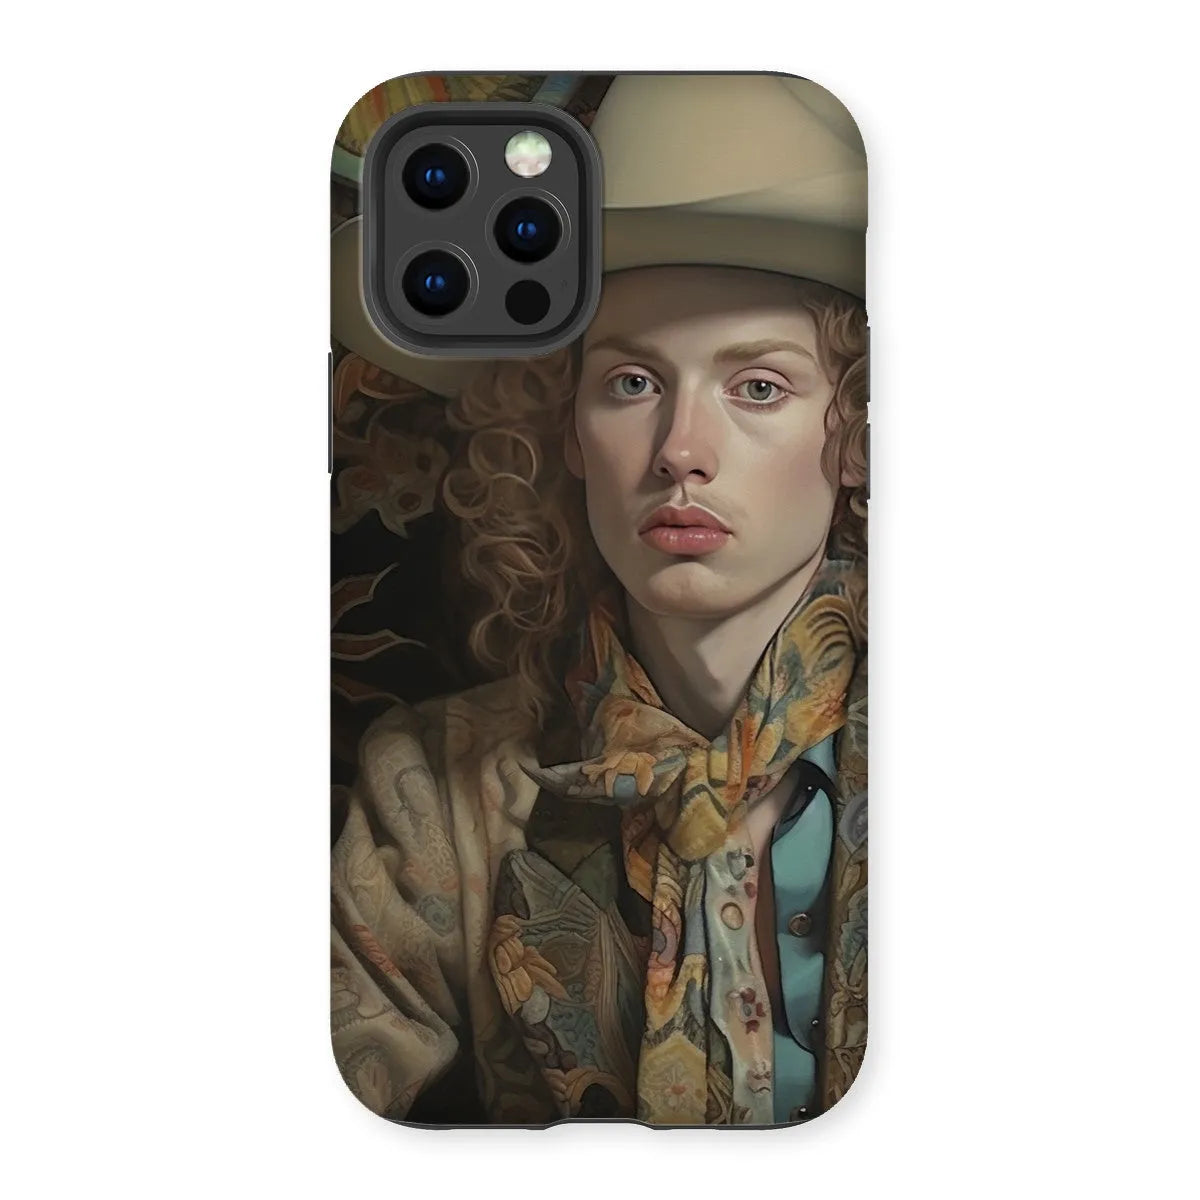 Ollie The Transgender Cowboy - F2m Dandy Outlaw Phone Case - Iphone 12 Pro / Matte - Mobile Phone Cases - Aesthetic Art